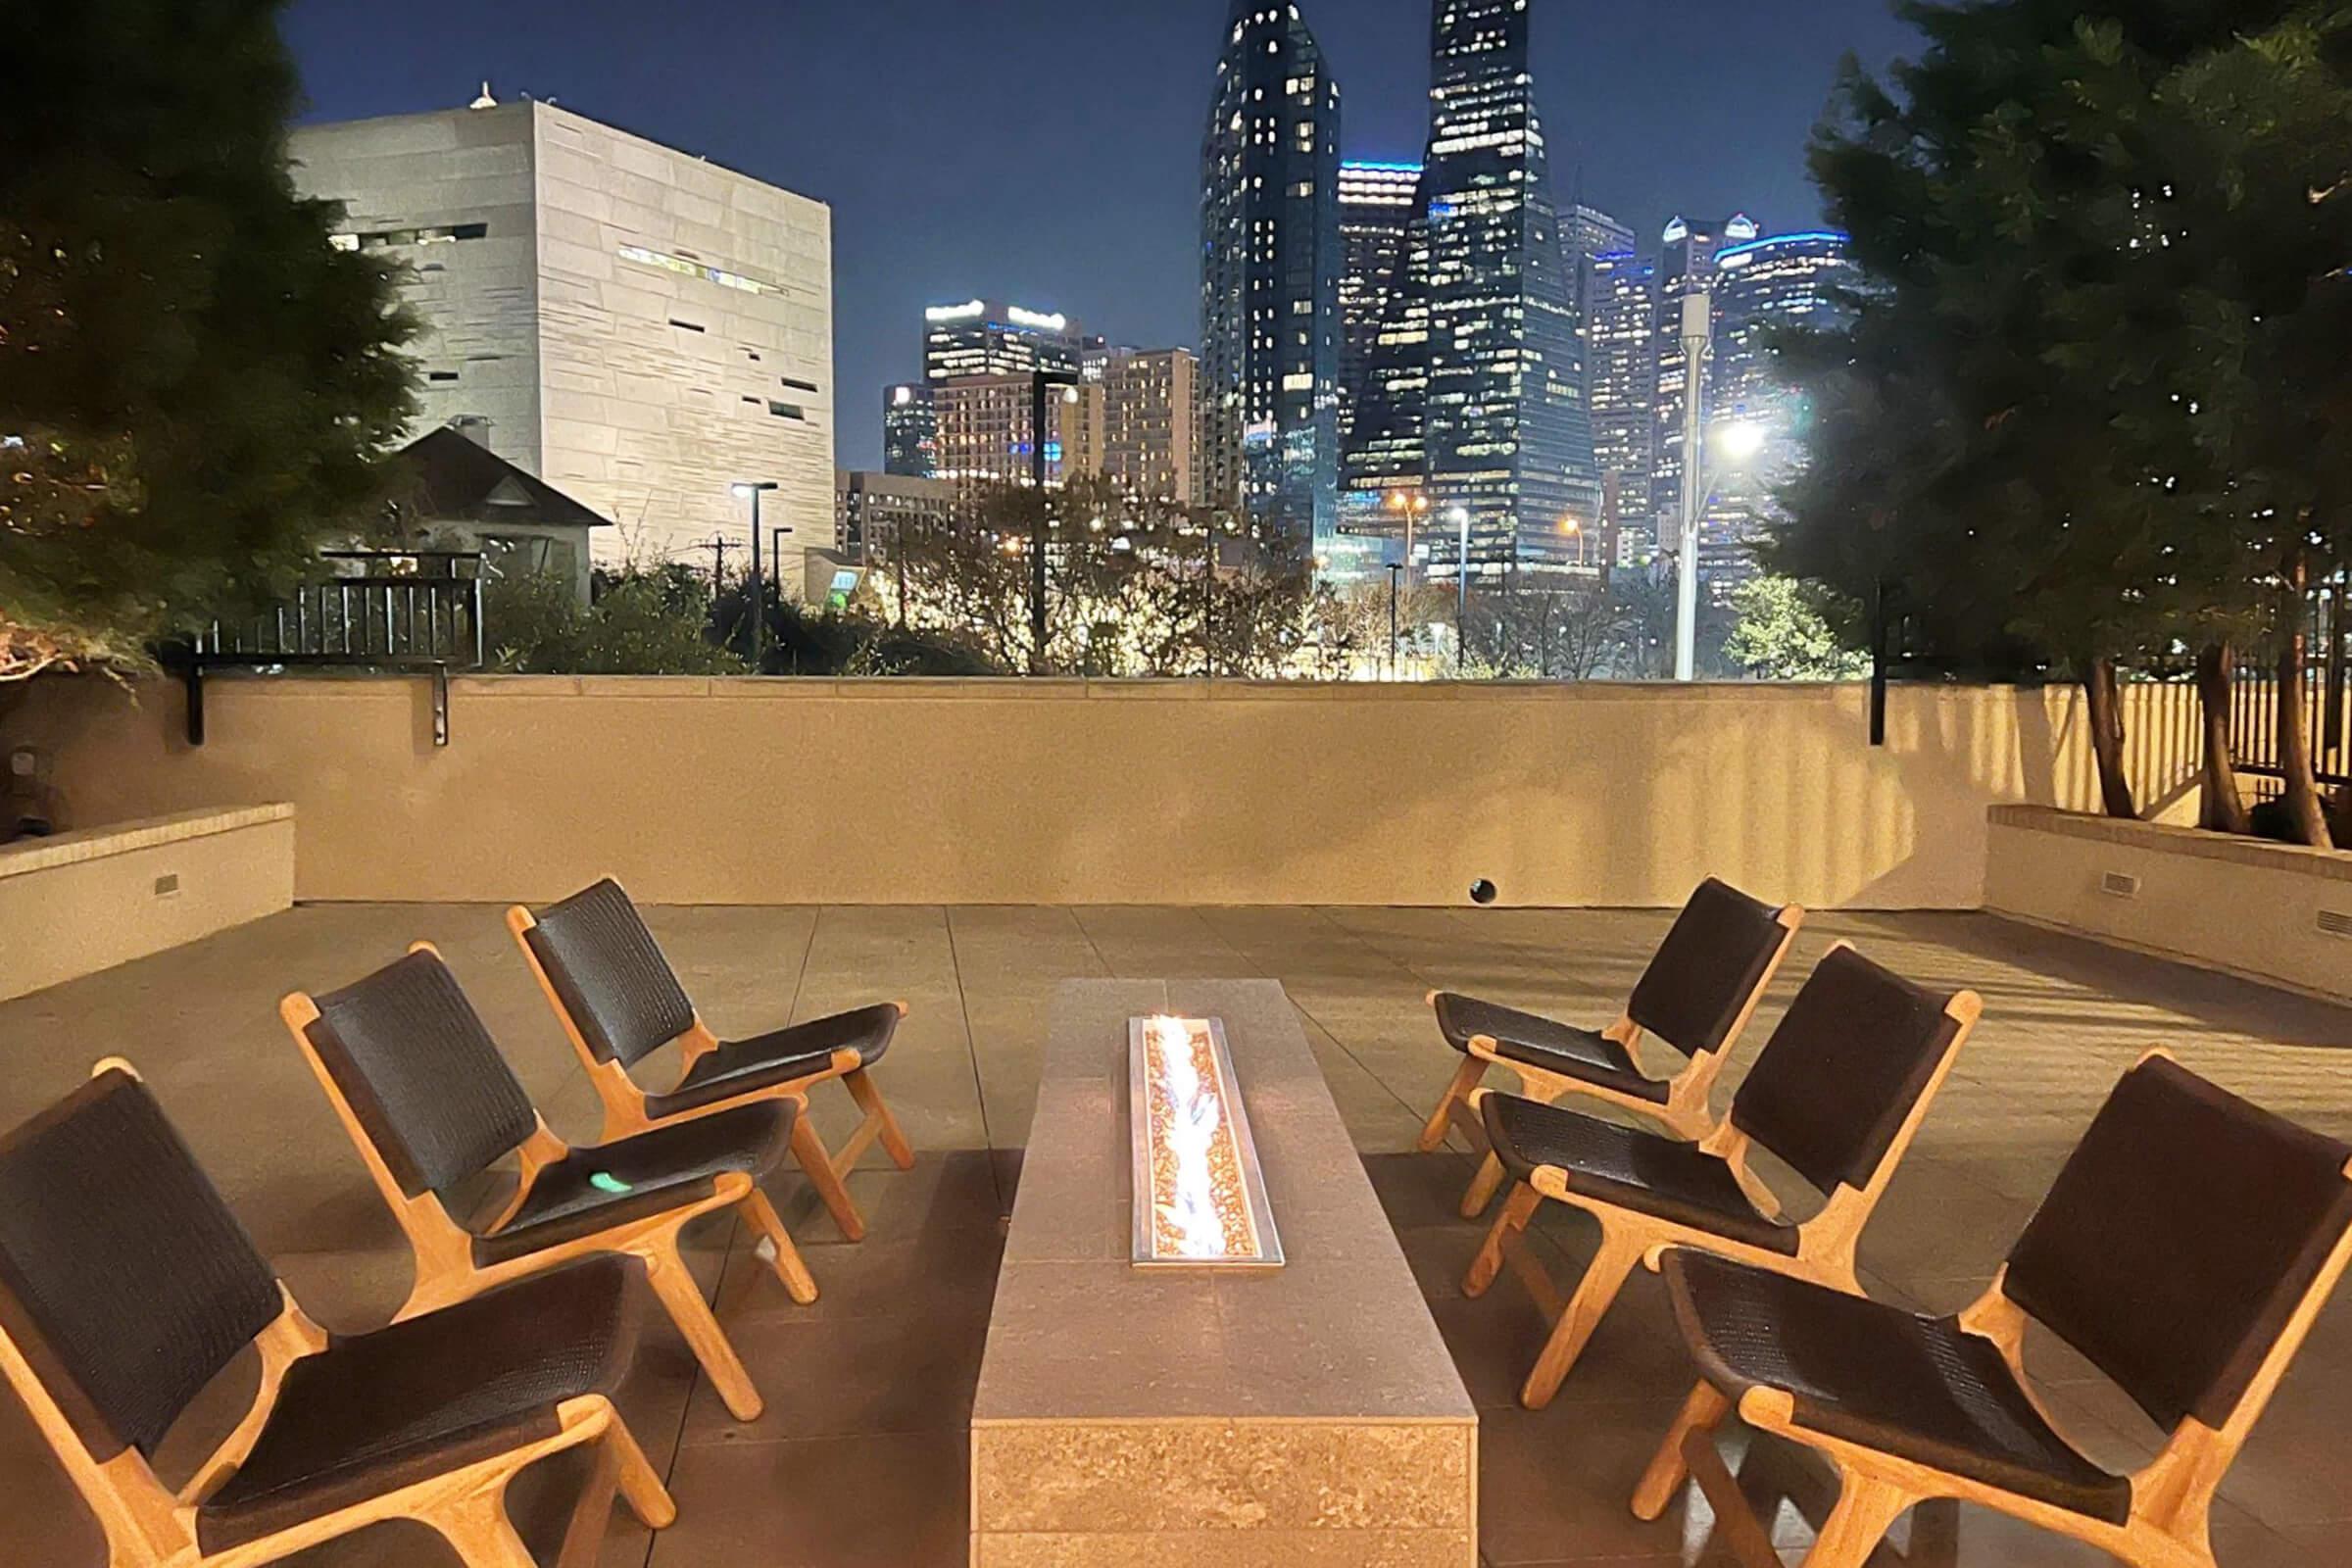 fire pit and chairs at night